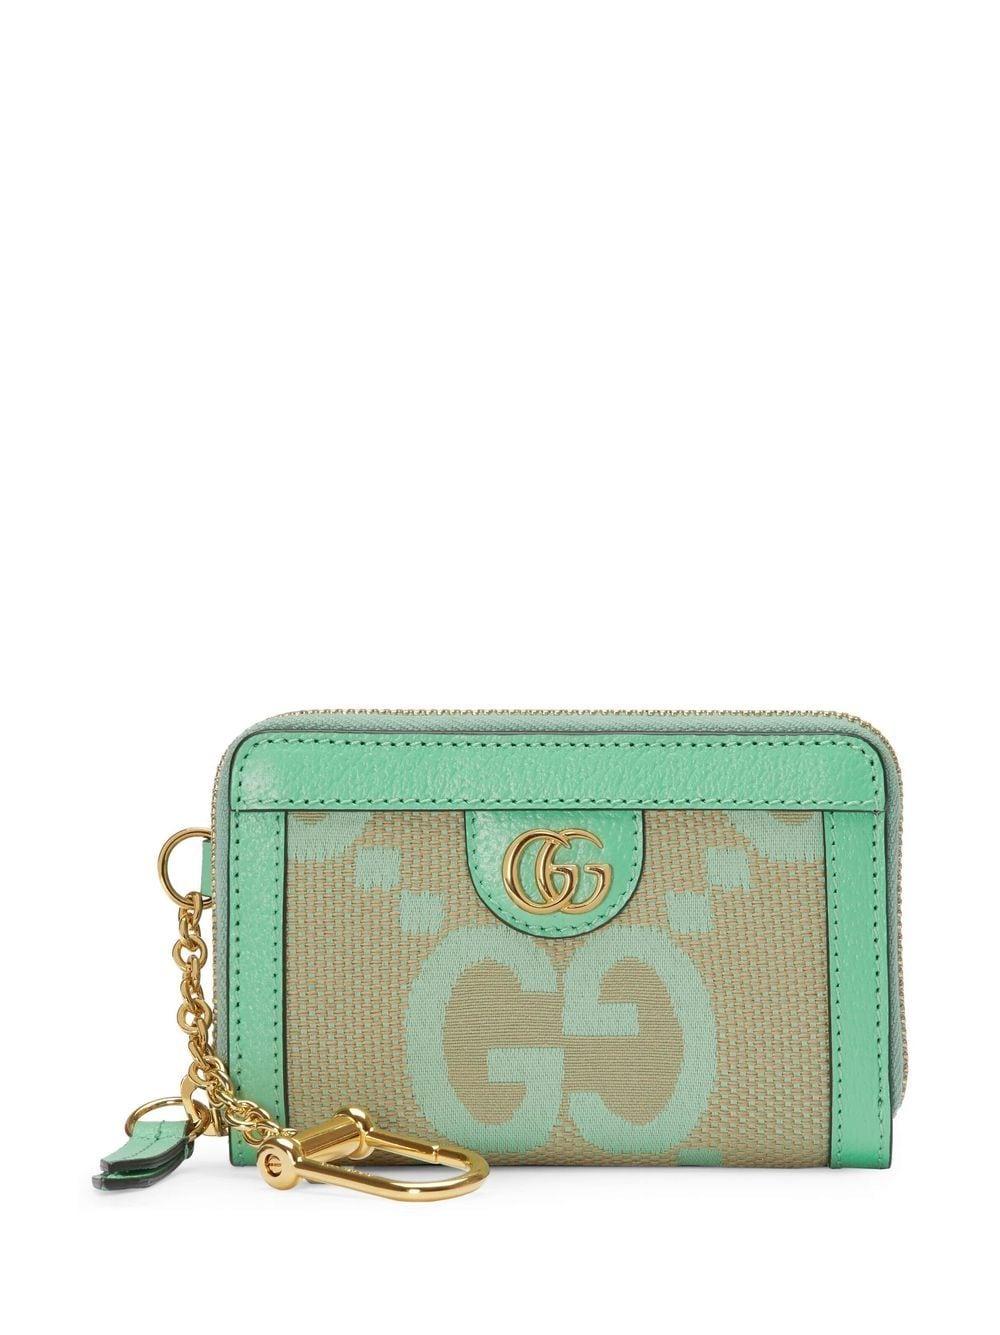 Gucci Ophidia Credit Card Case in Green